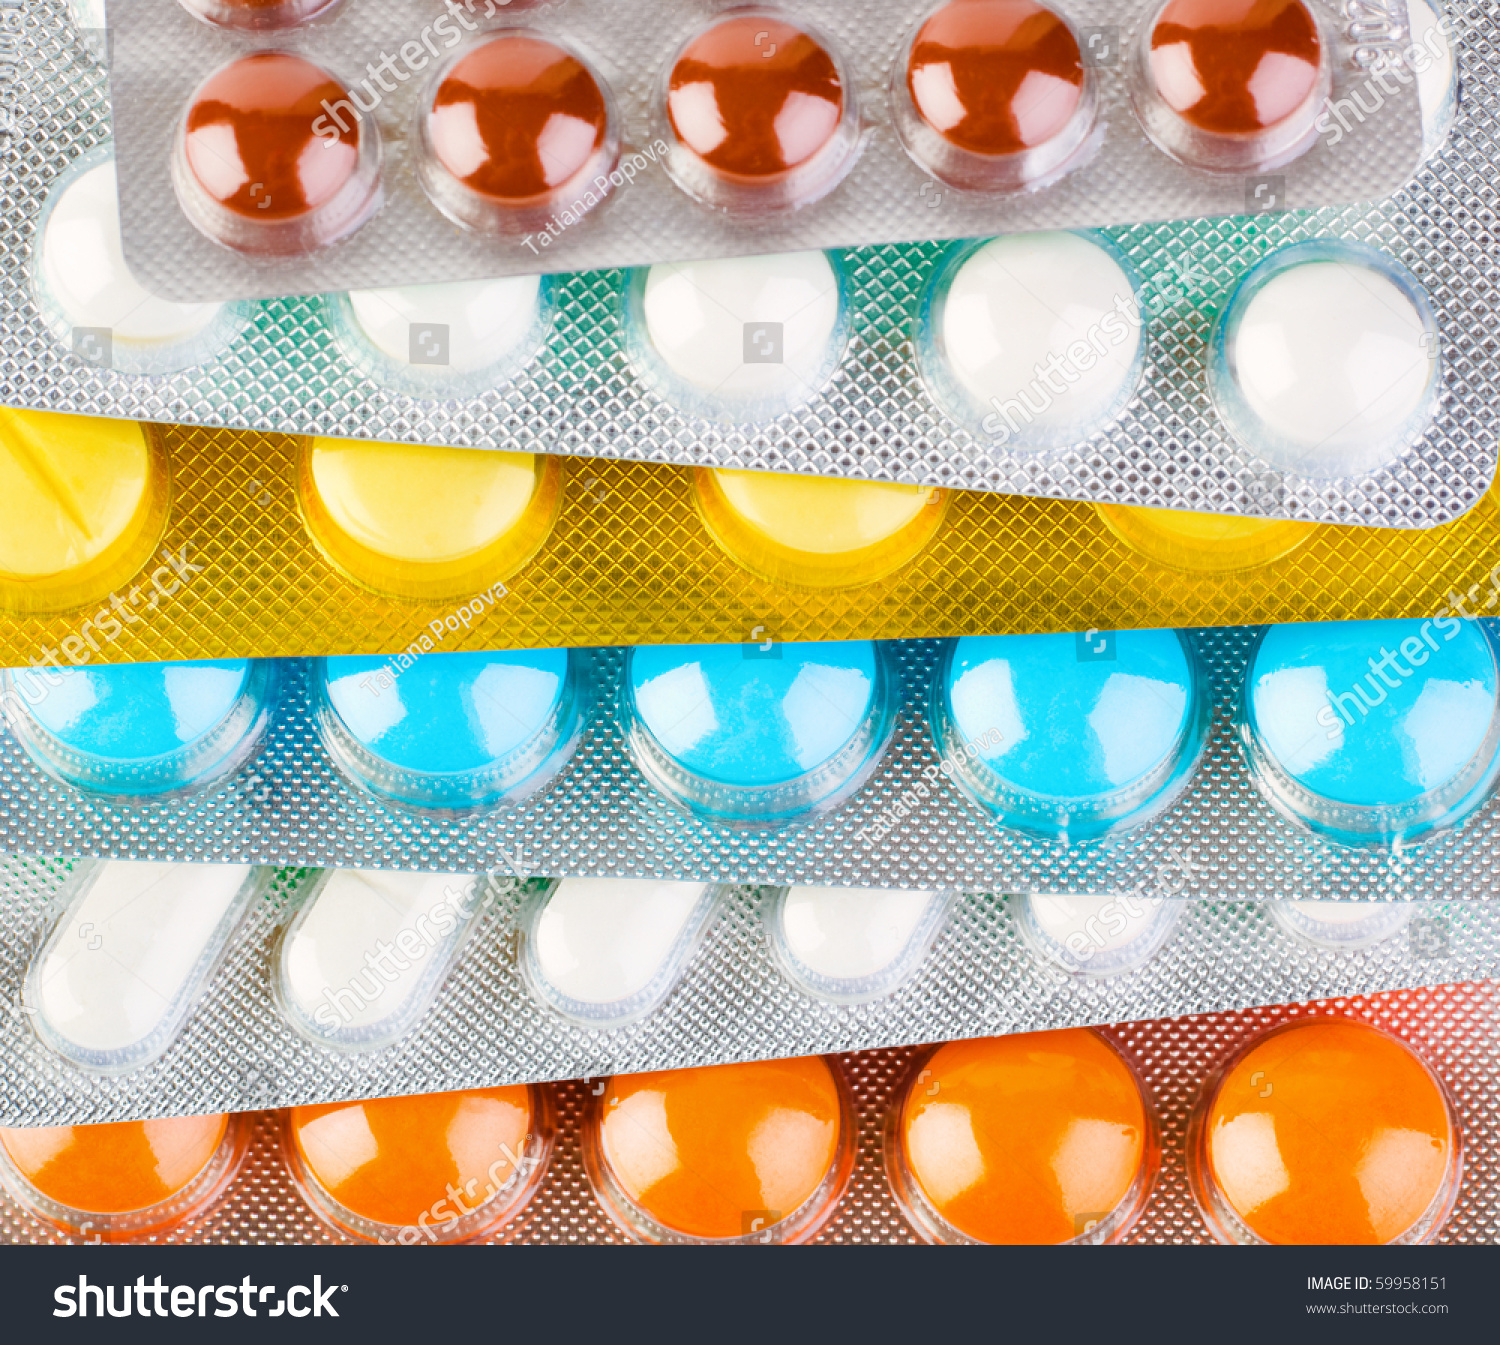 Packs Pills Abstract Medical Background Stock Photo (Royalty Free ...